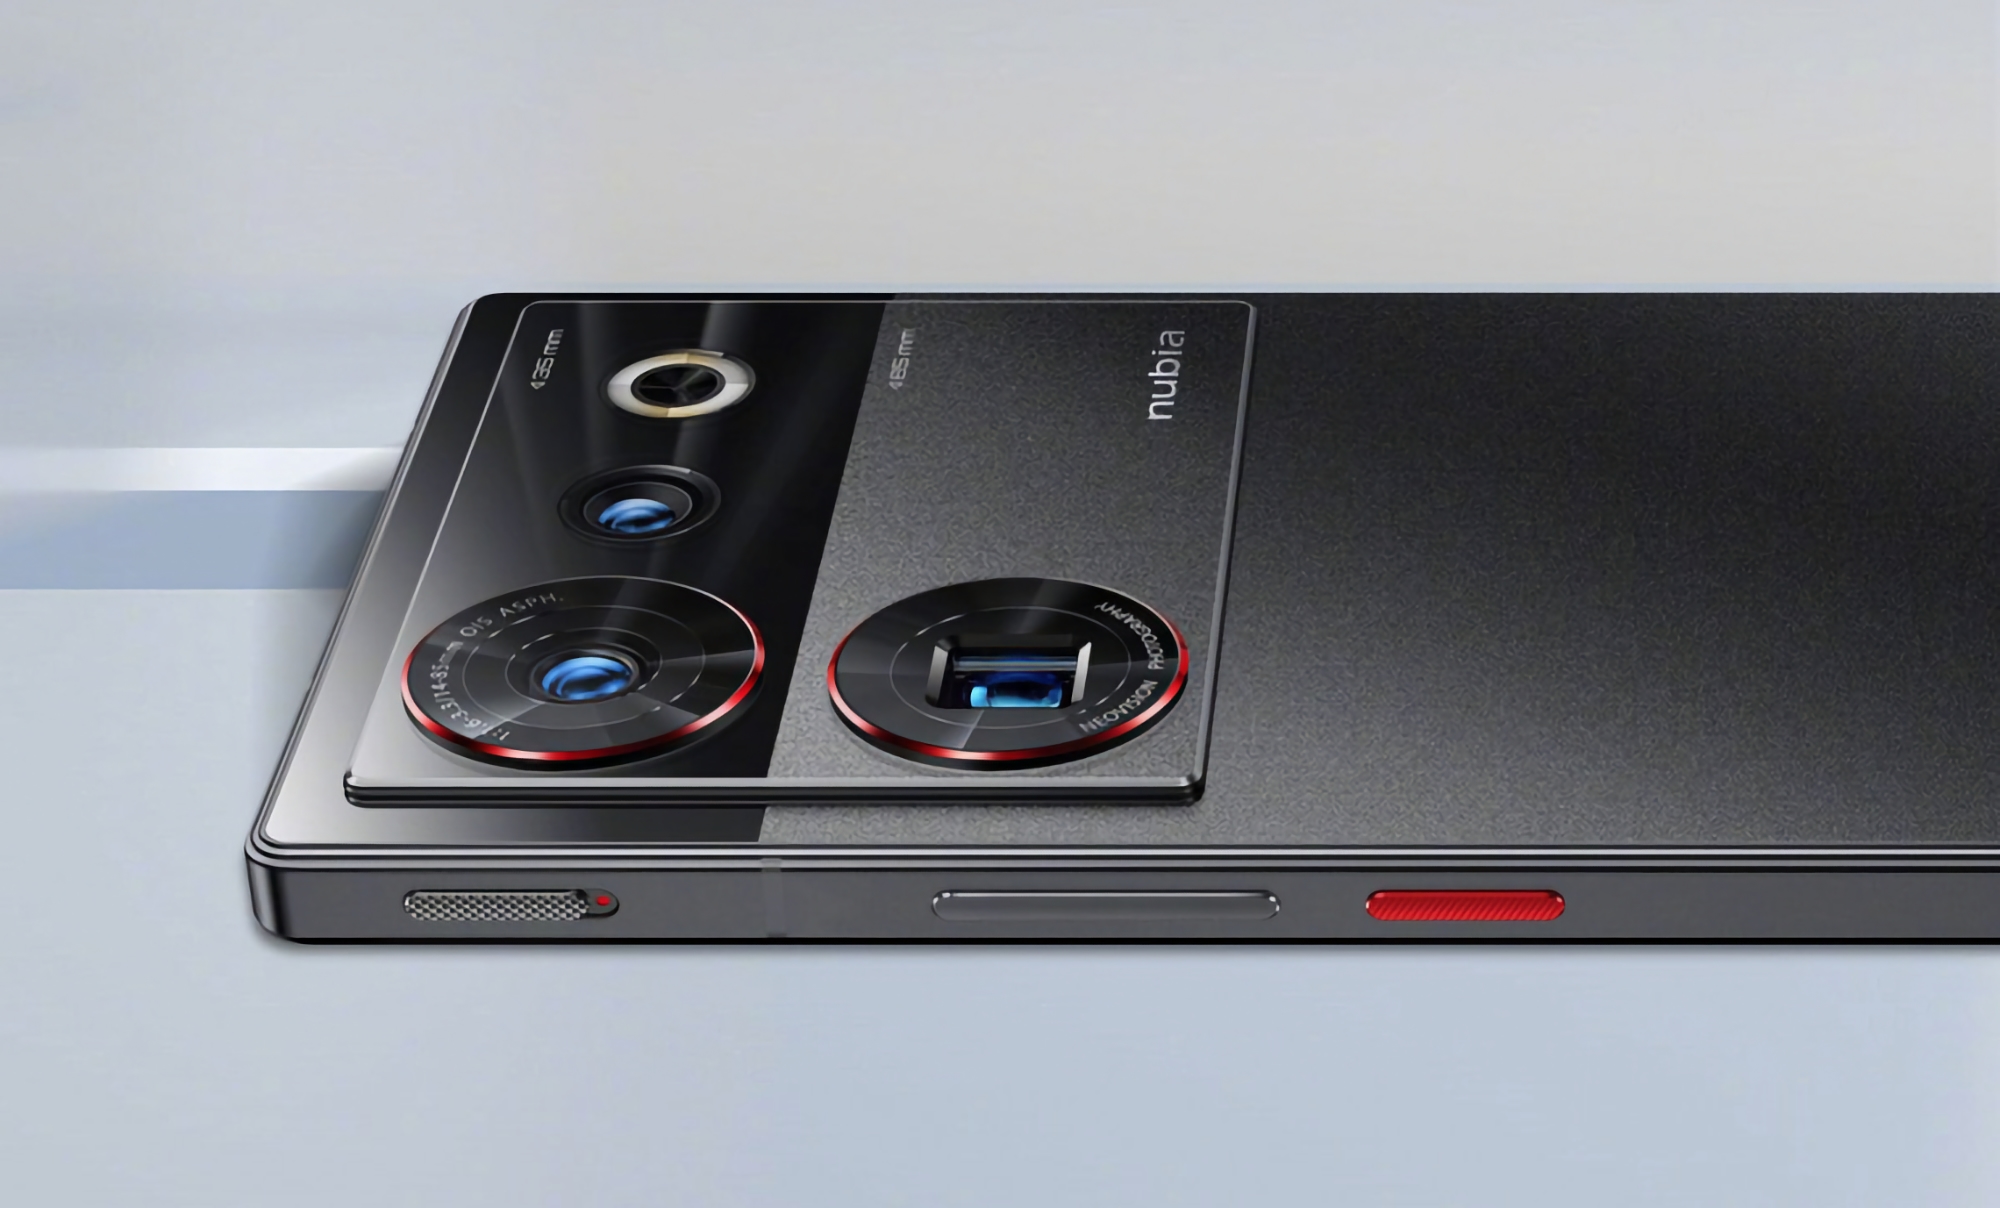 It's official: the Nubia Z60 Ultra will debut in December